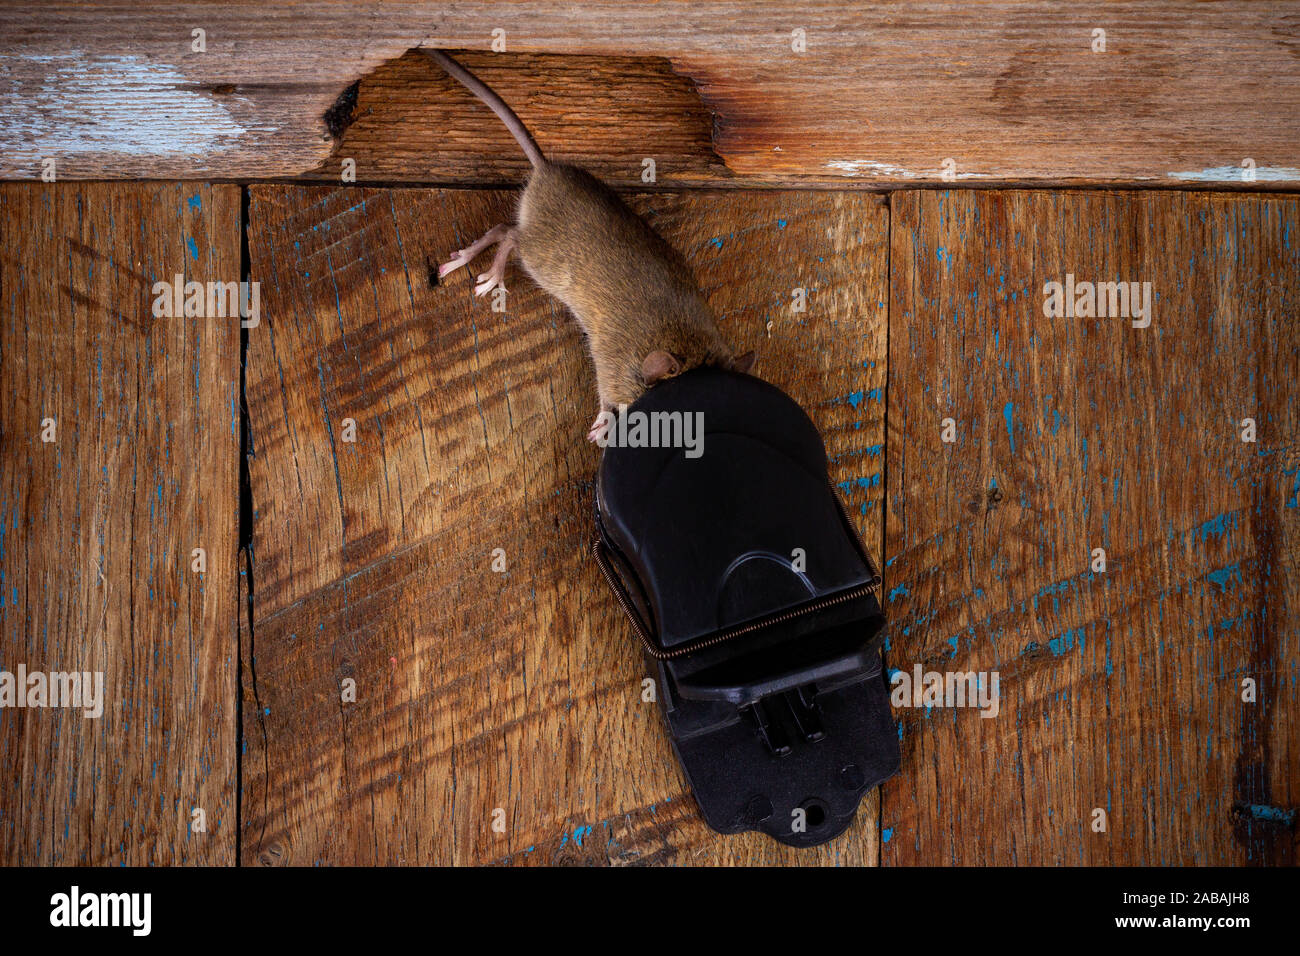 https://c8.alamy.com/comp/2ABAJH8/a-dead-mouse-in-a-black-plastic-mousetrap-on-a-wooden-floor-near-a-hole-in-a-wooden-wall-top-view-2ABAJH8.jpg